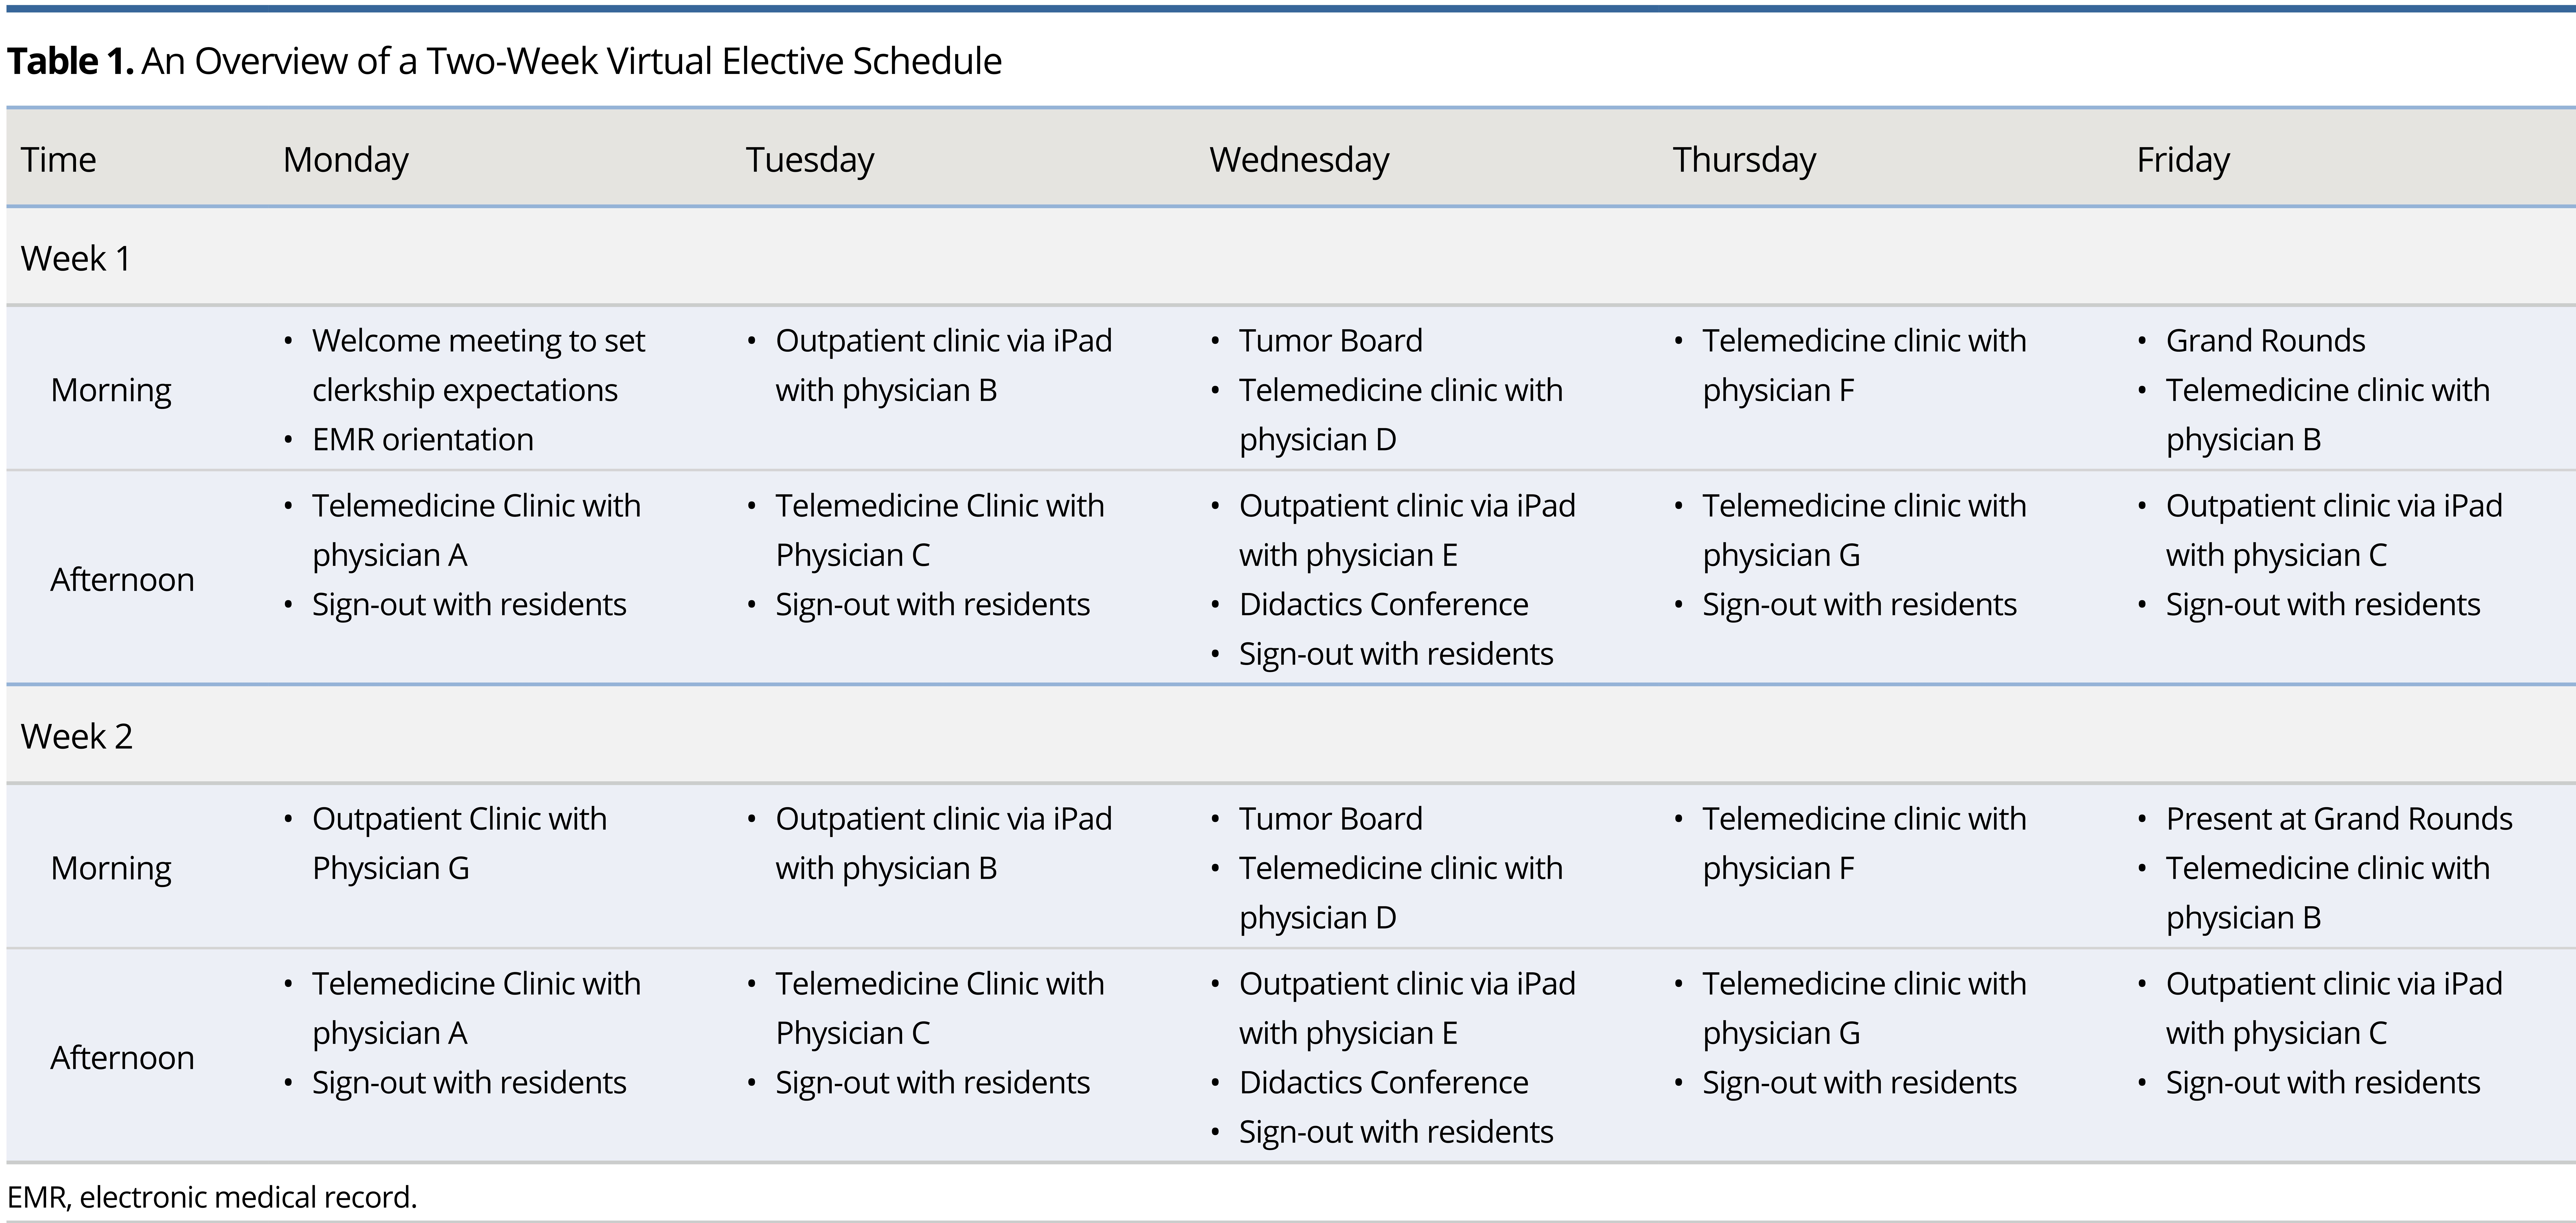 Table 1.jpgAn Overview of a Two-Week Virtual Elective Schedule